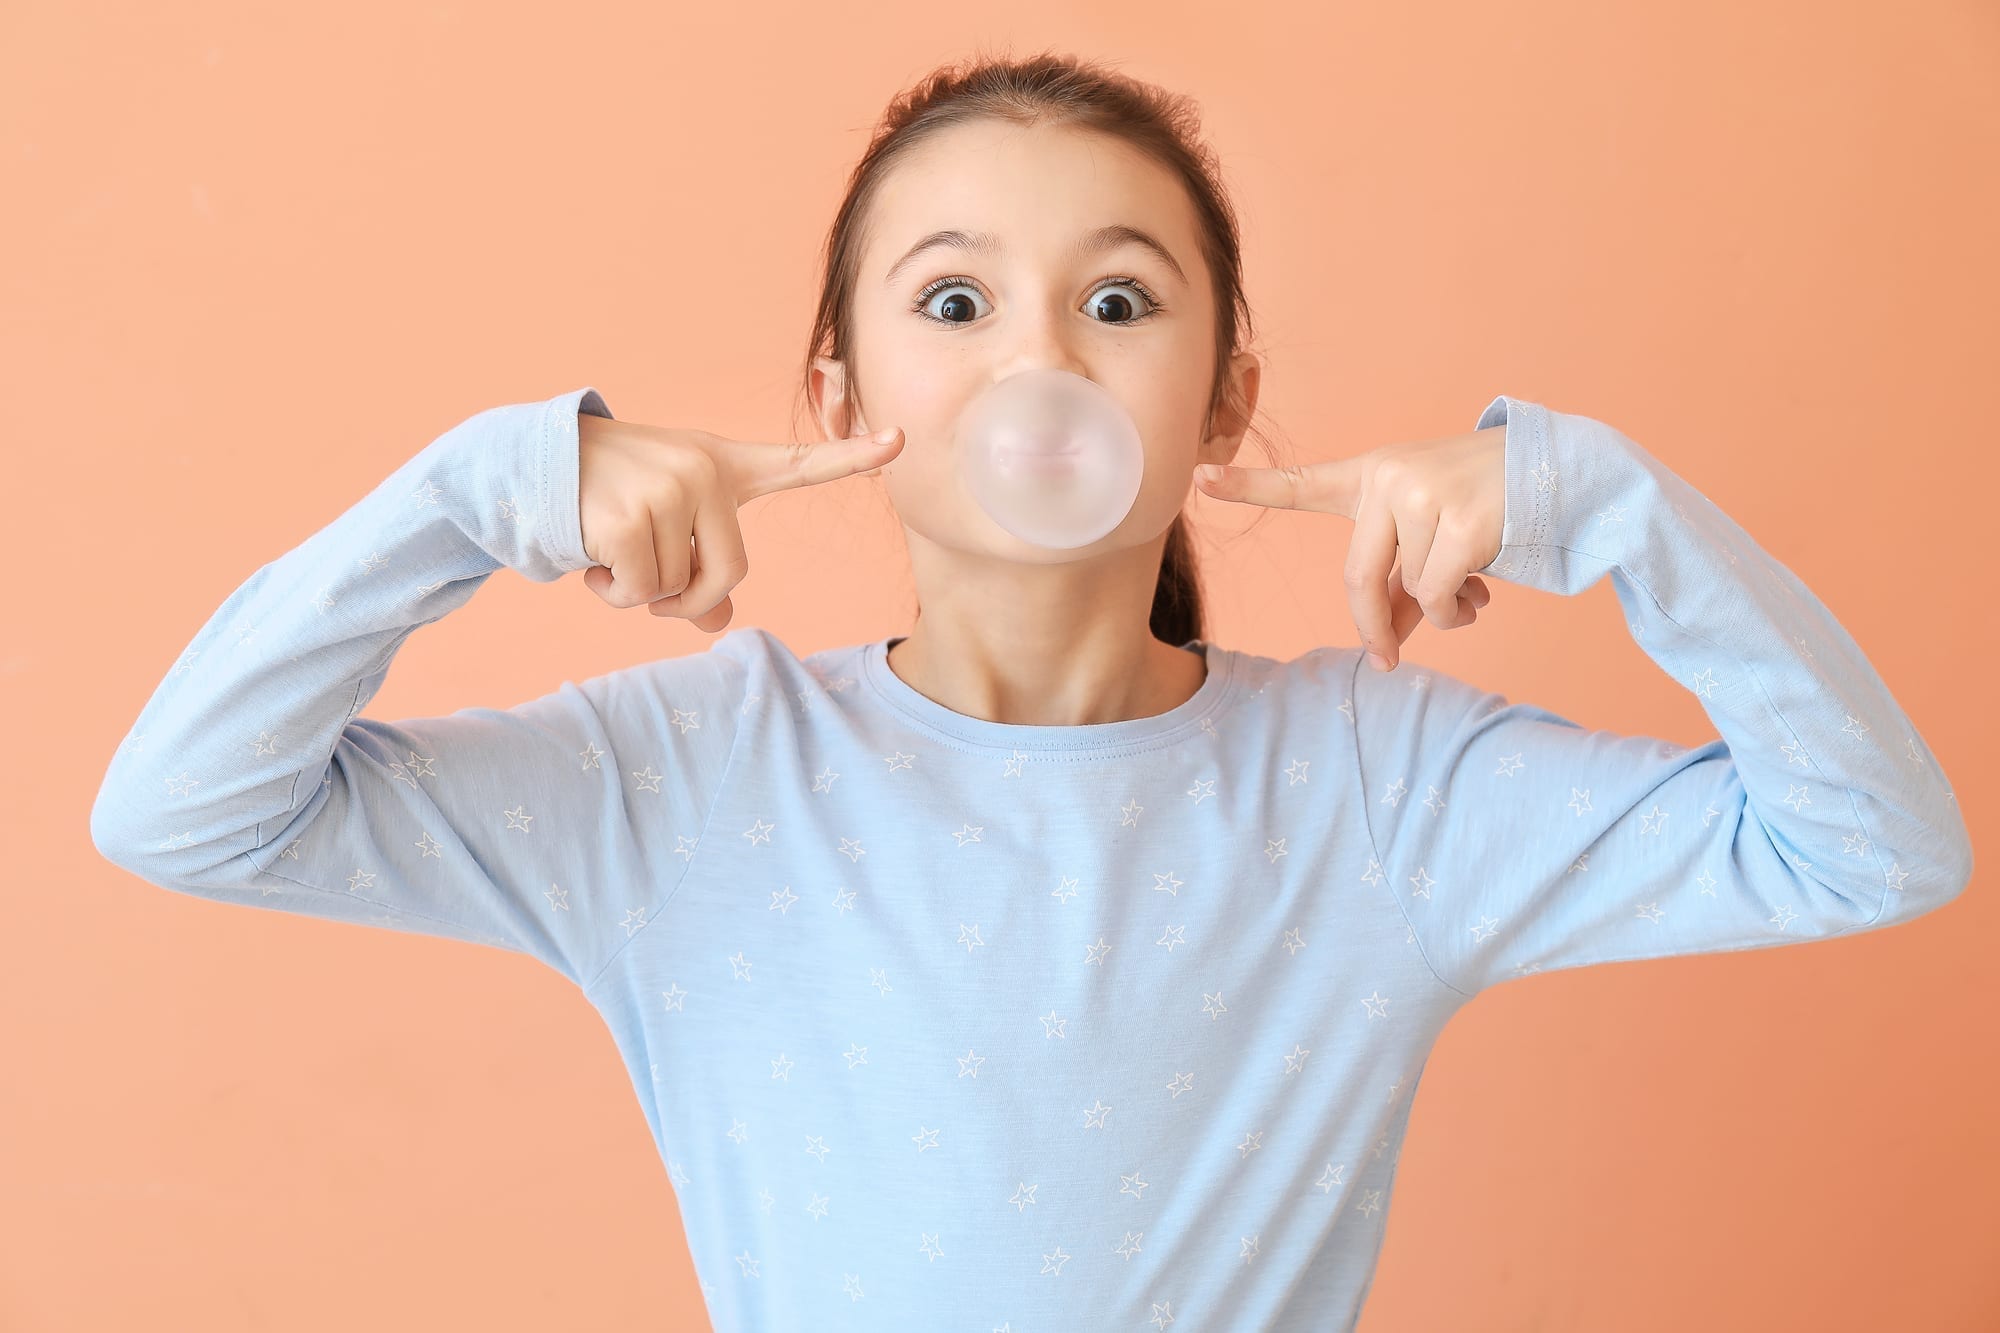 7 Fun Facts About Dentistry and Oral Health for Kids